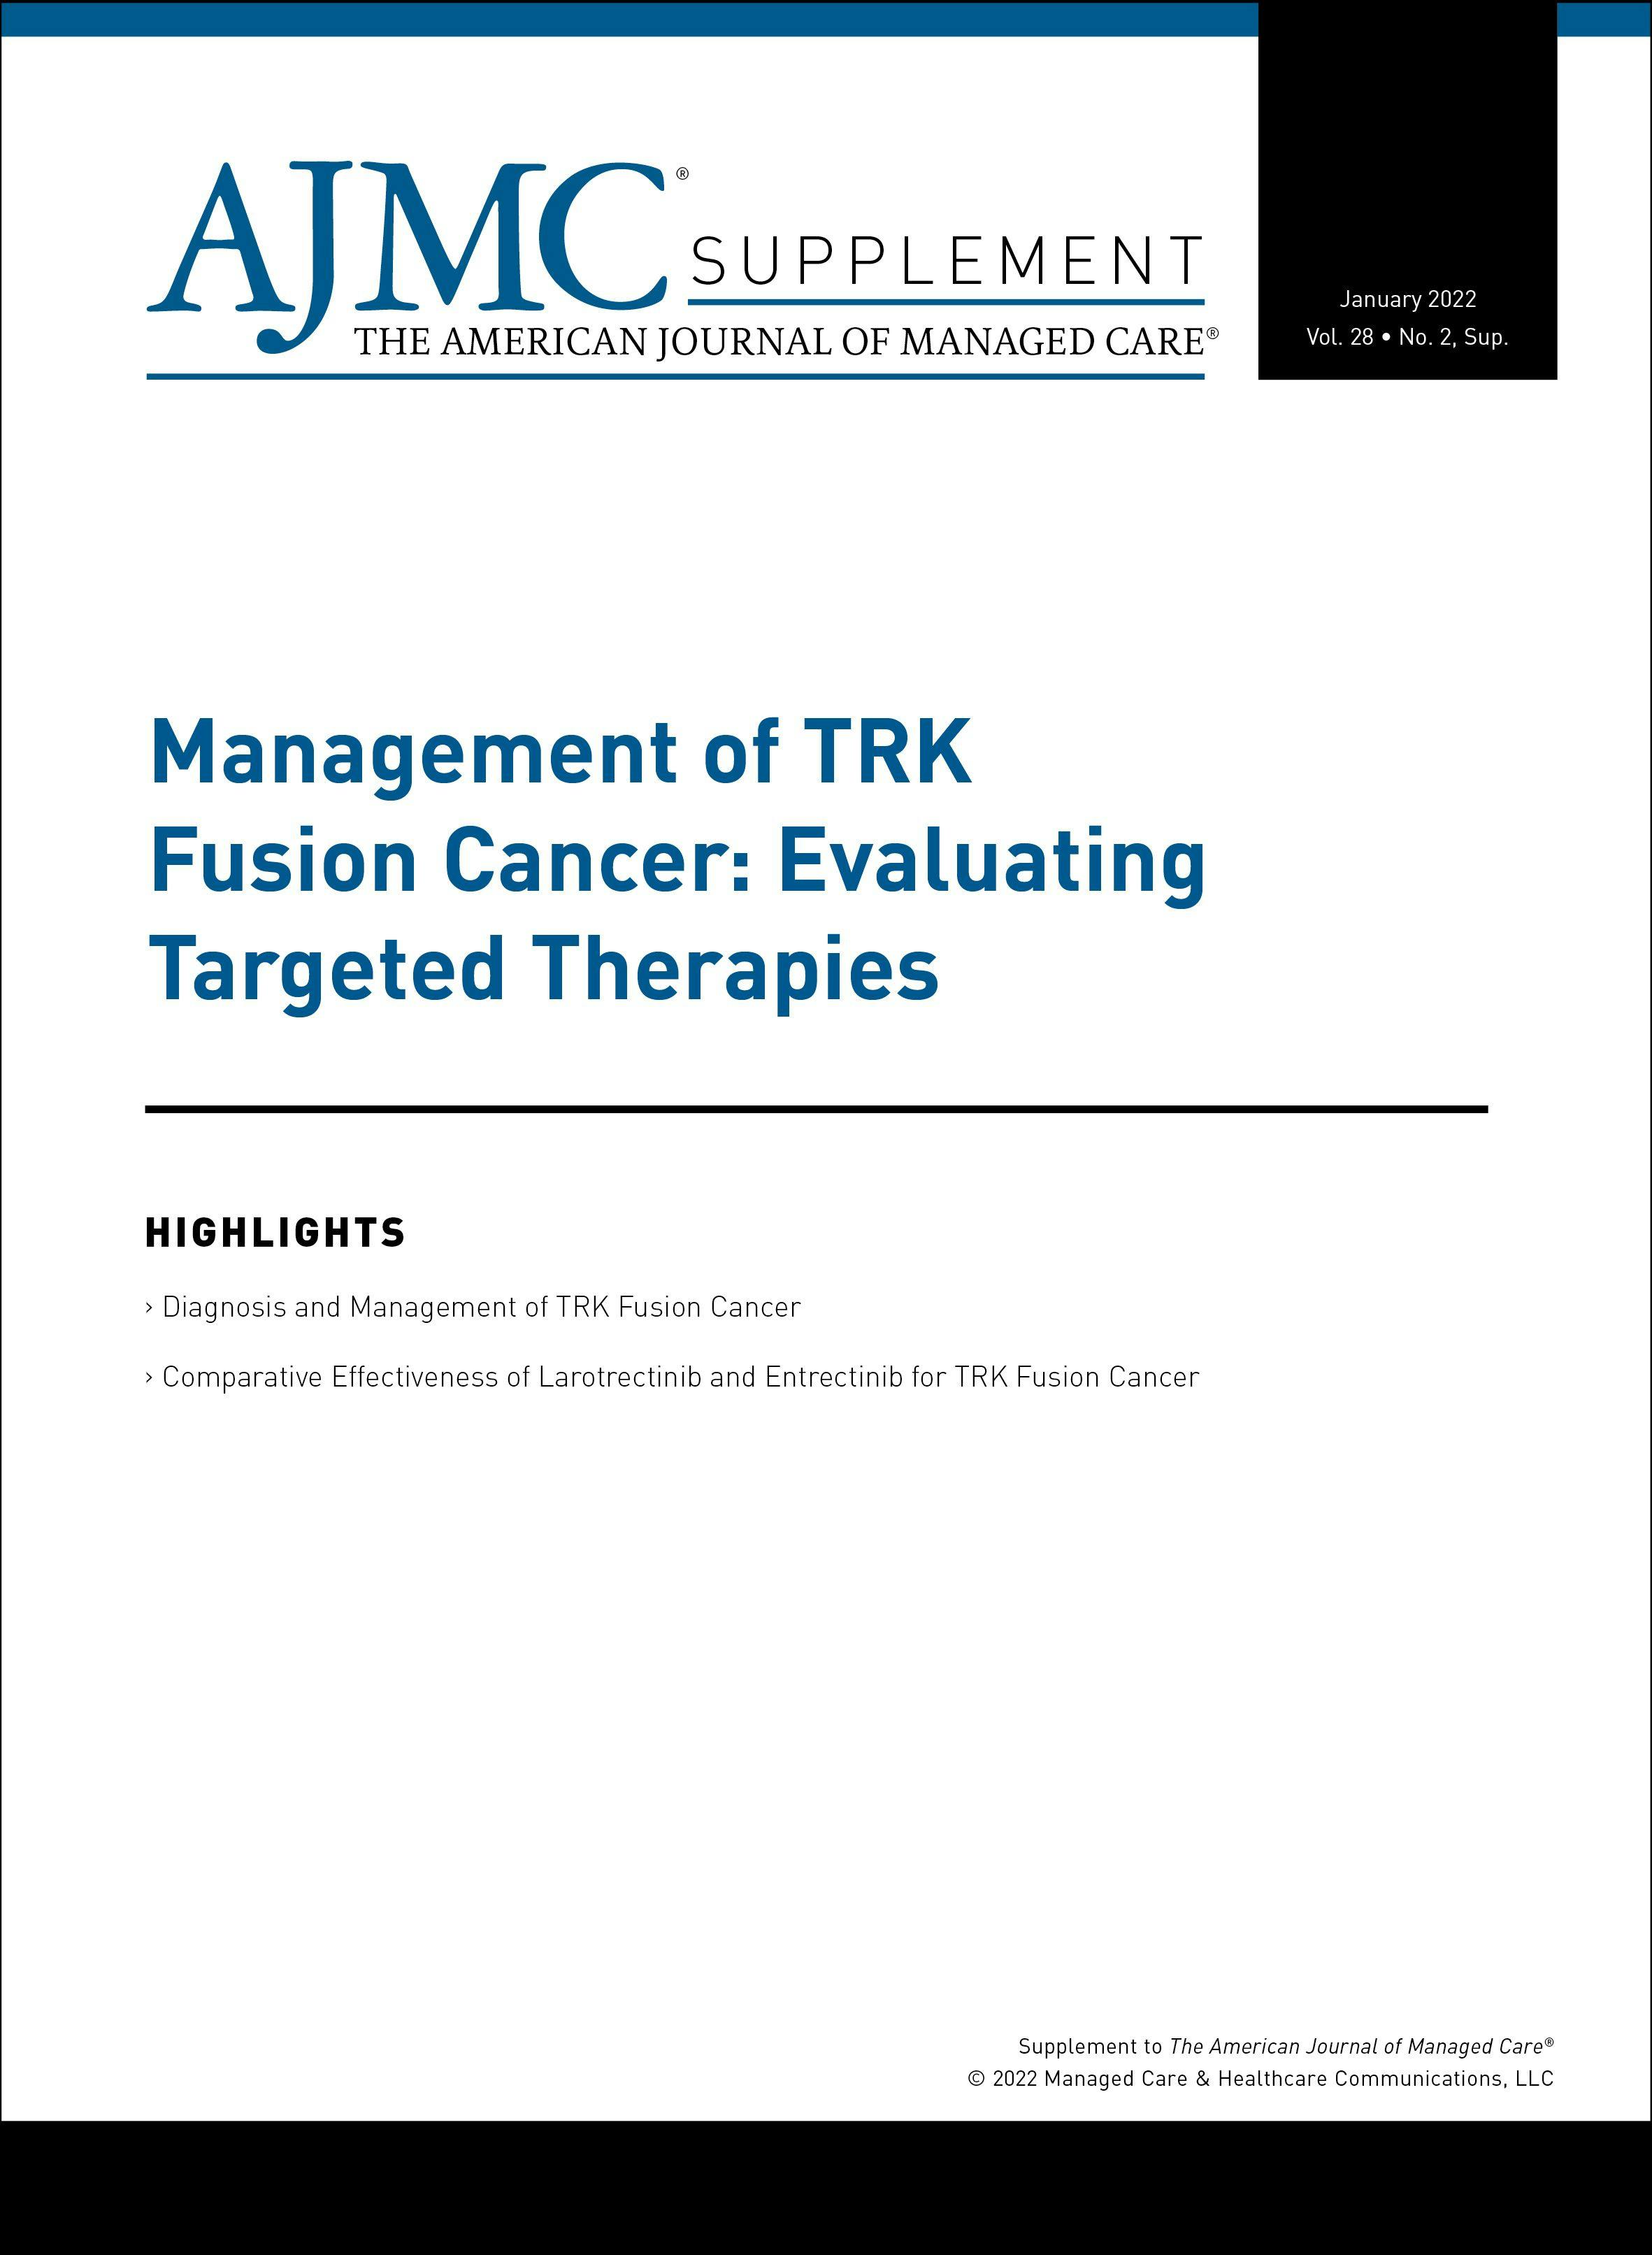 Management of TRK Fusion Cancer: Evaluating Targeted Therapies